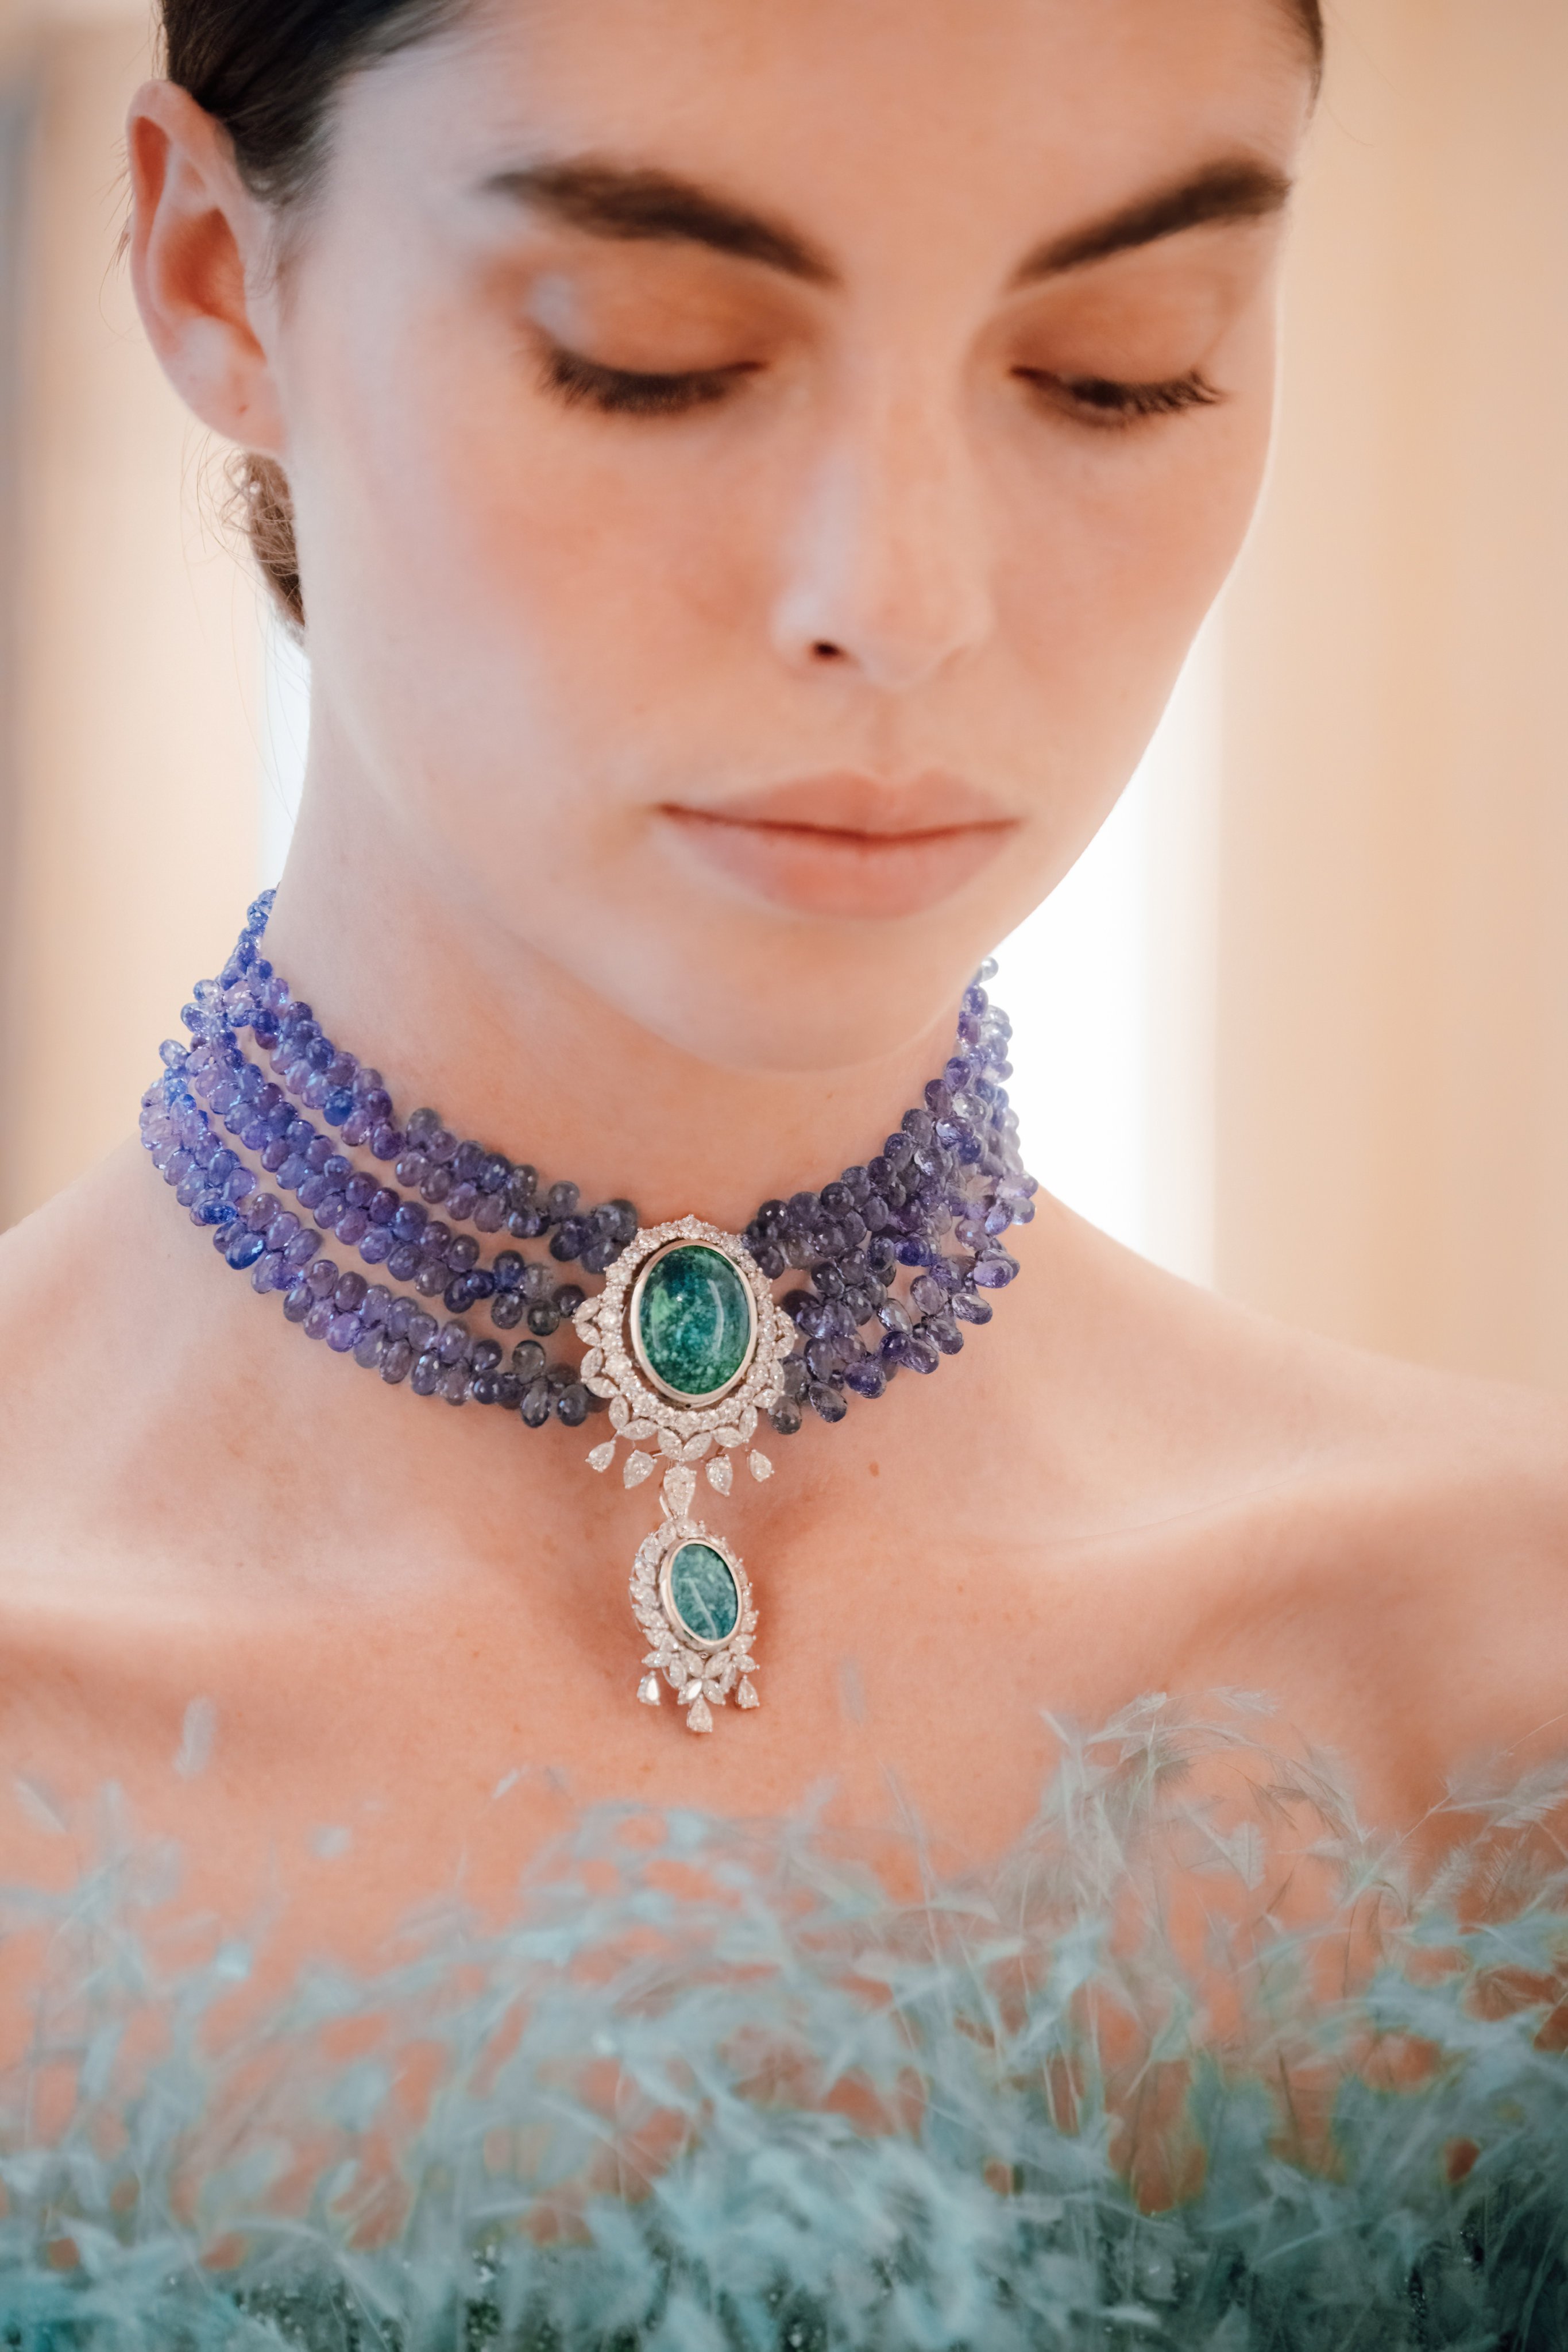 High jewellery house Chopard is beloved by stars like Mariah Carey and Julia Roberts, and the Swiss maison was also at the forefront of adopting sustainable practices in the making of high jewellery. Photo: Handout